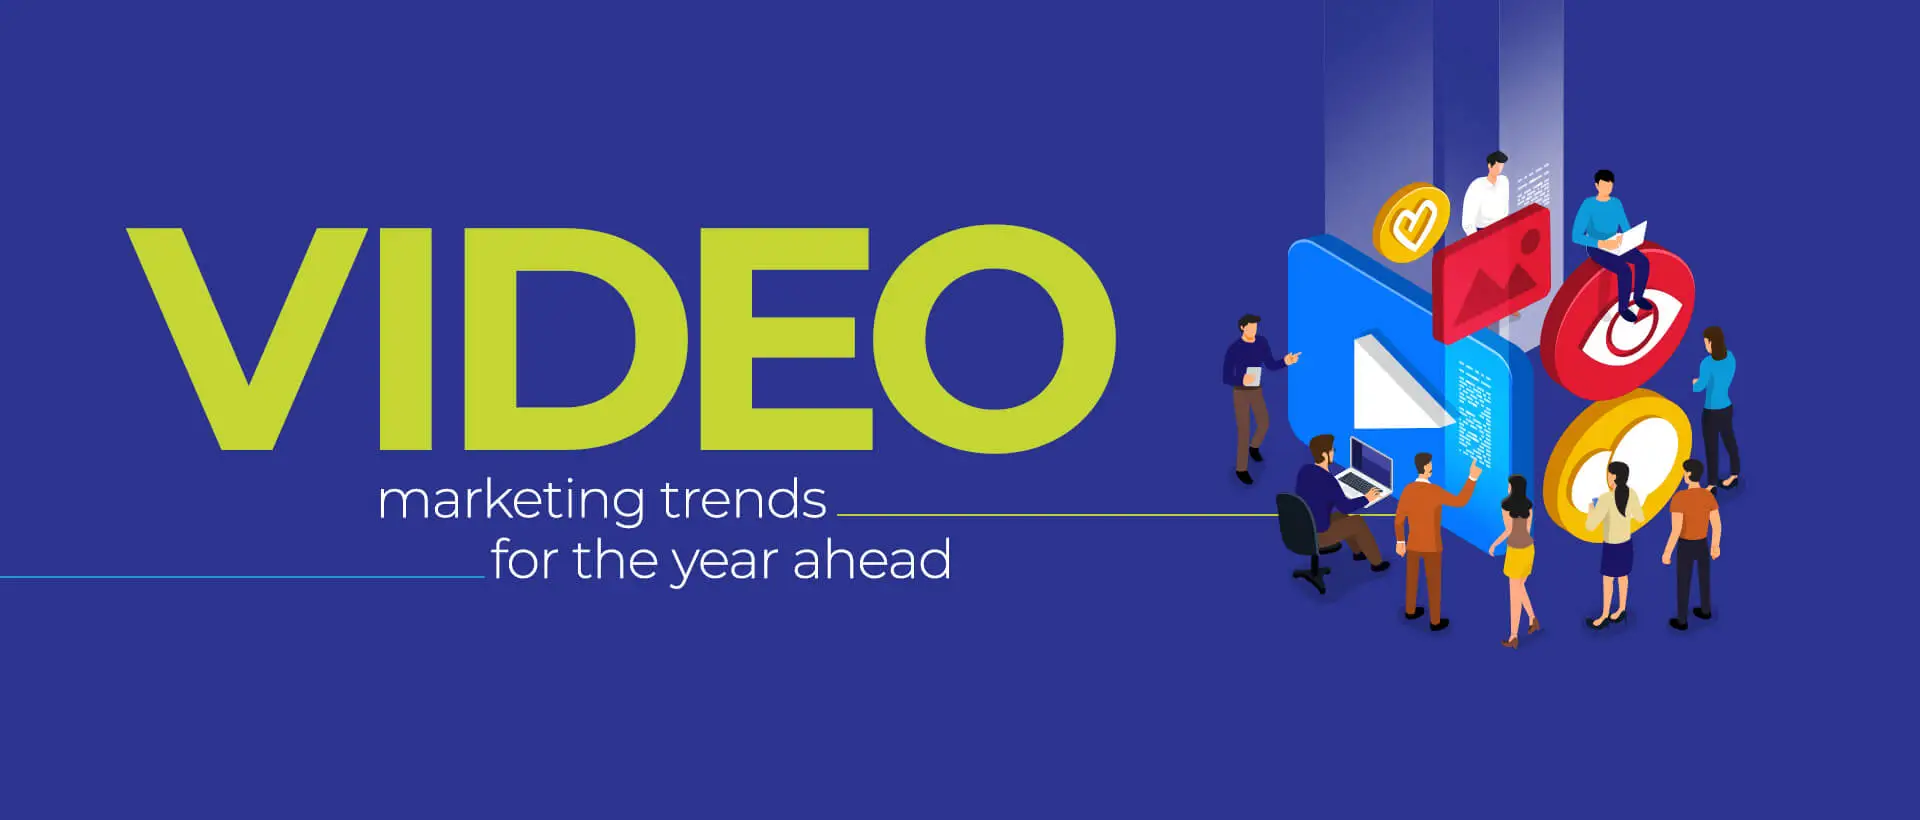 Video marketing trends for the year ahead